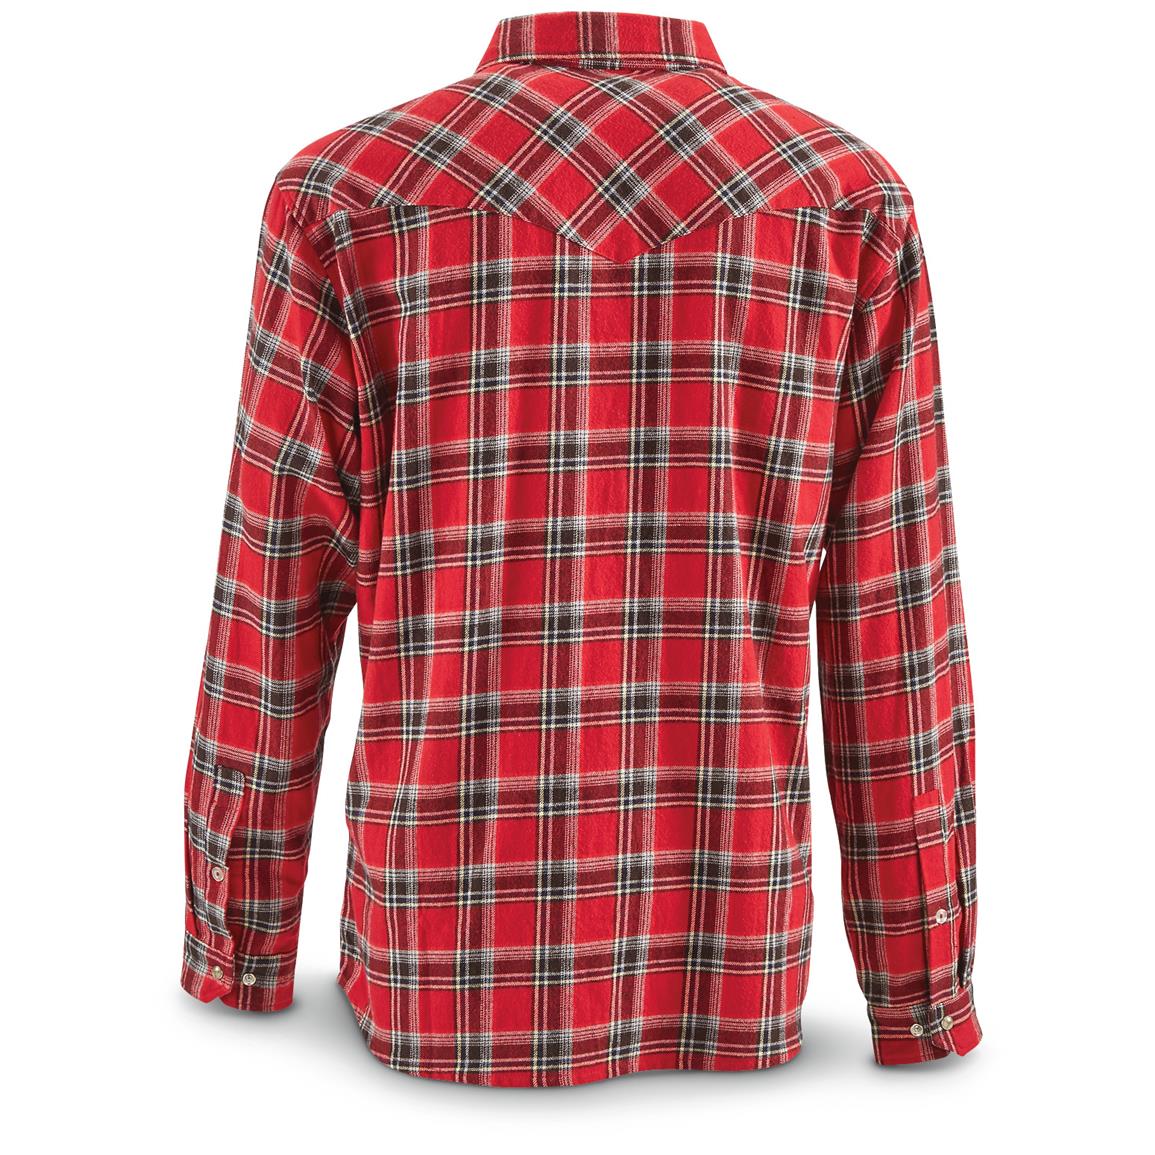 Guide Gear Men's Western Flannel Shirt - 670052, Shirts at Sportsman's ...